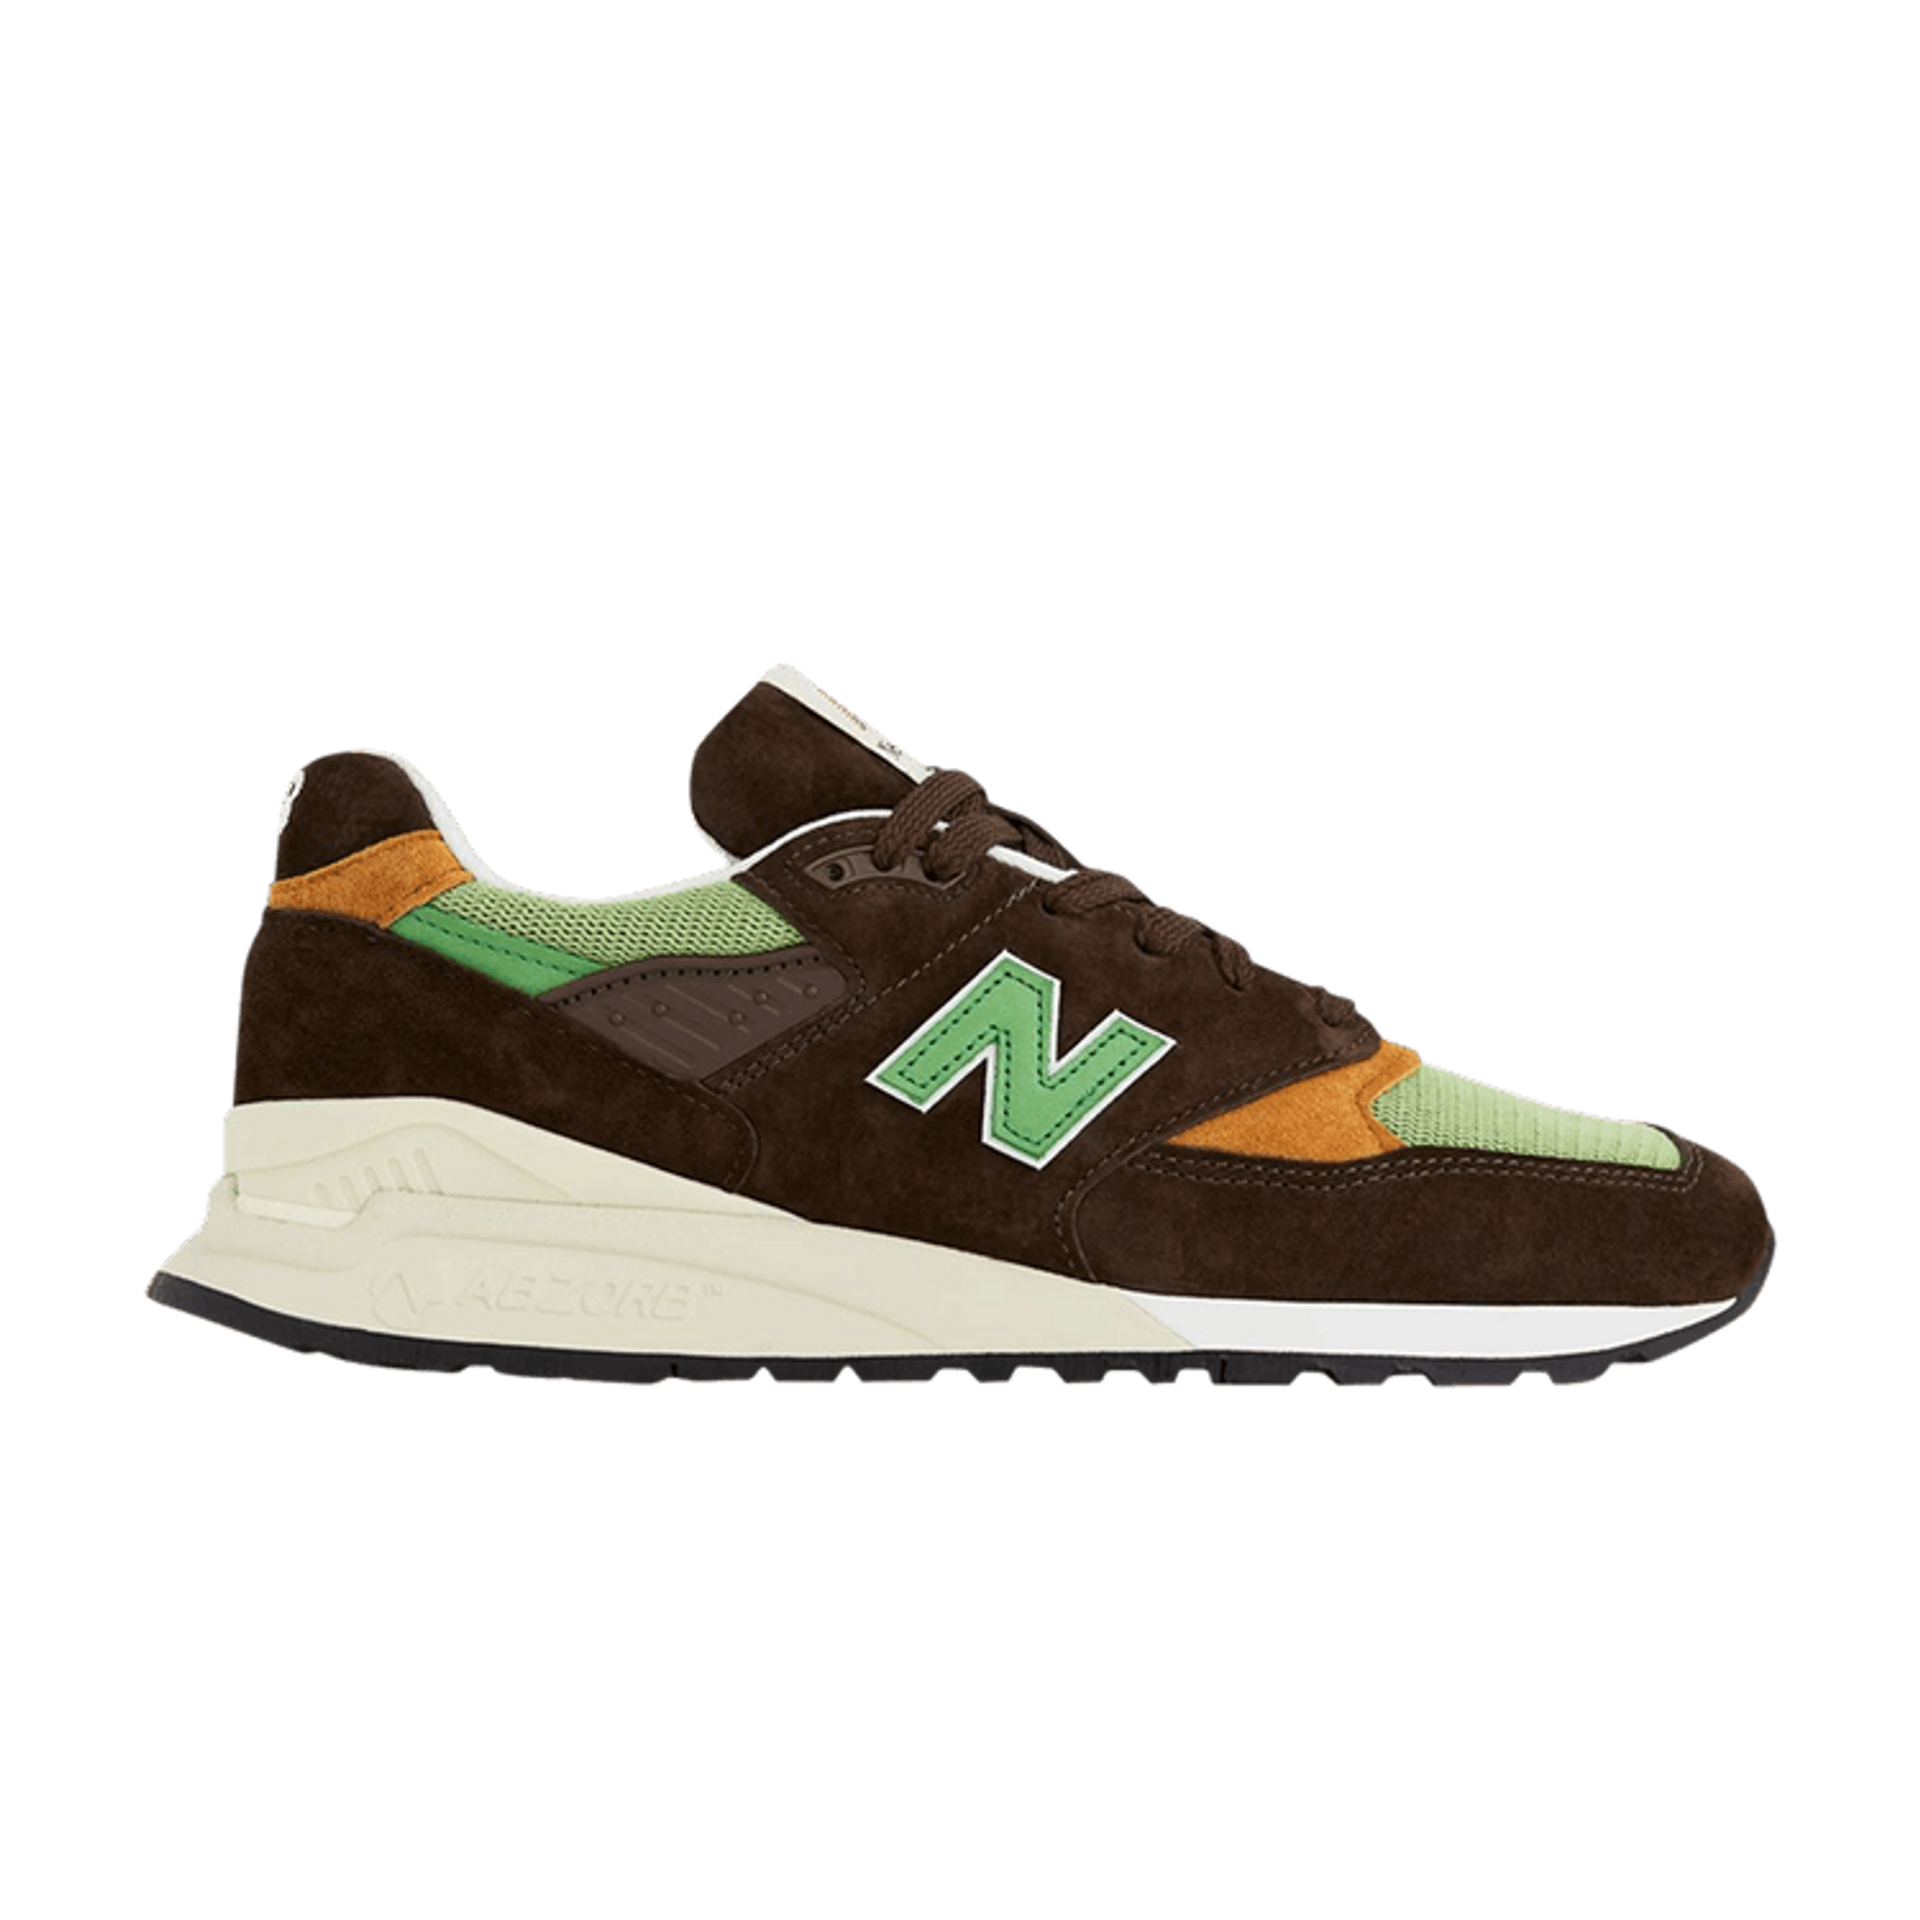 Teddy Santis x New Balance 998 Made in USA 'Rich Earth Chive'